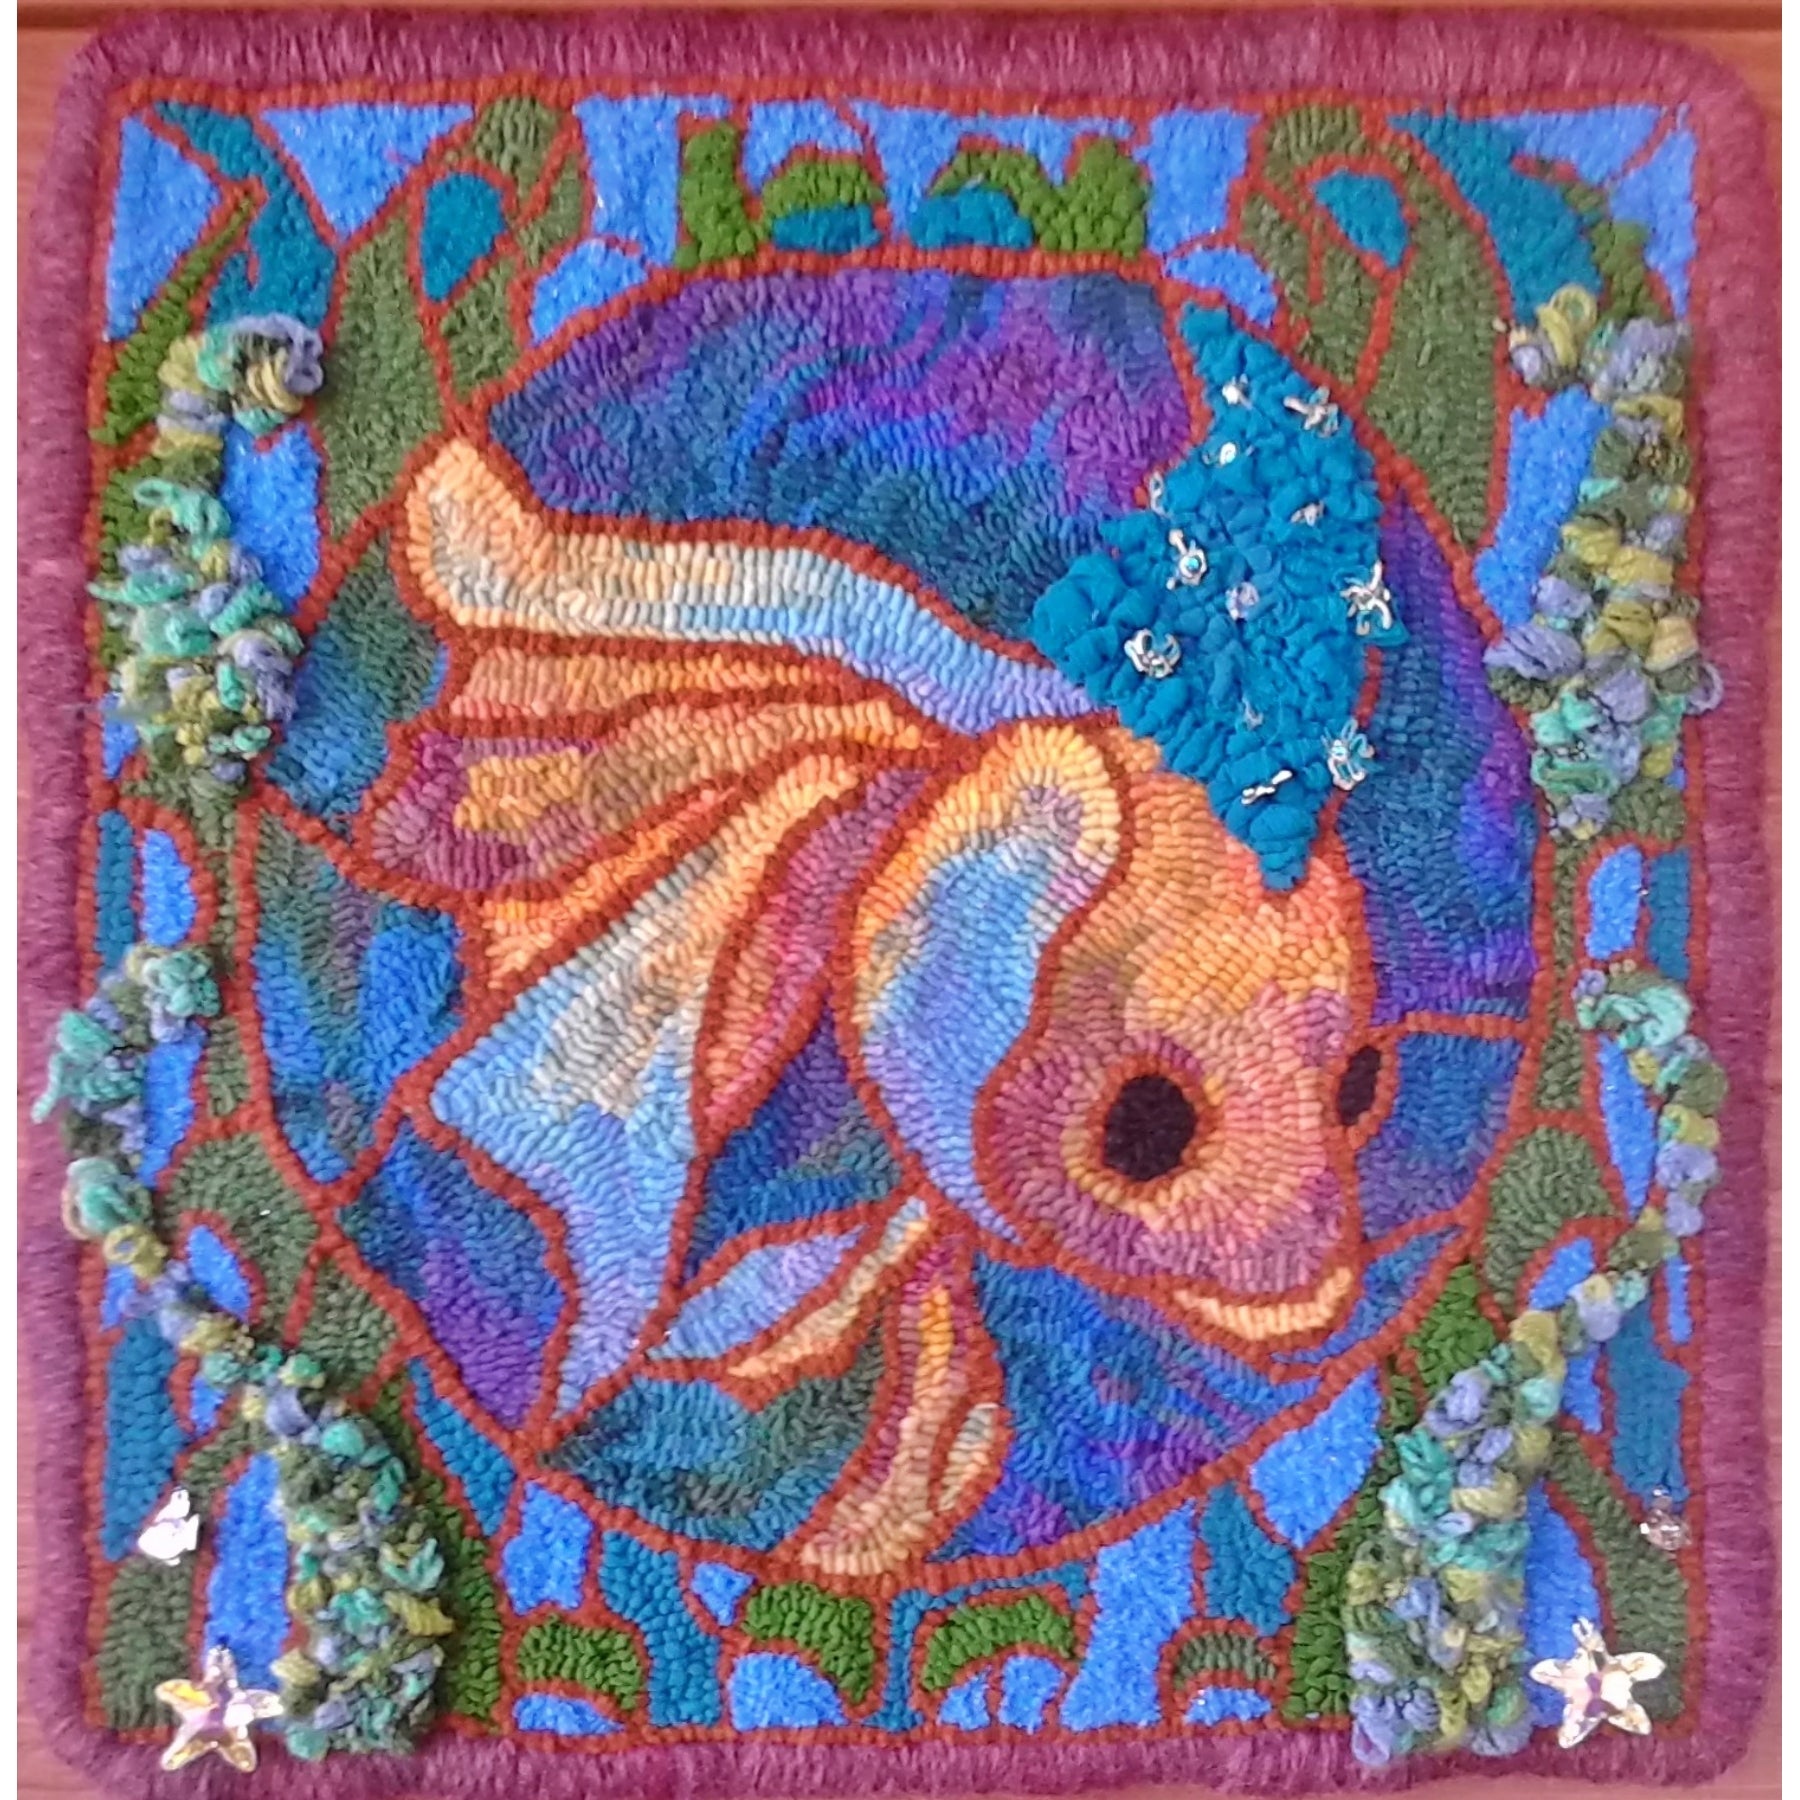 Stained Glass Fish, rug hooked by Mary Jo C Nafzger